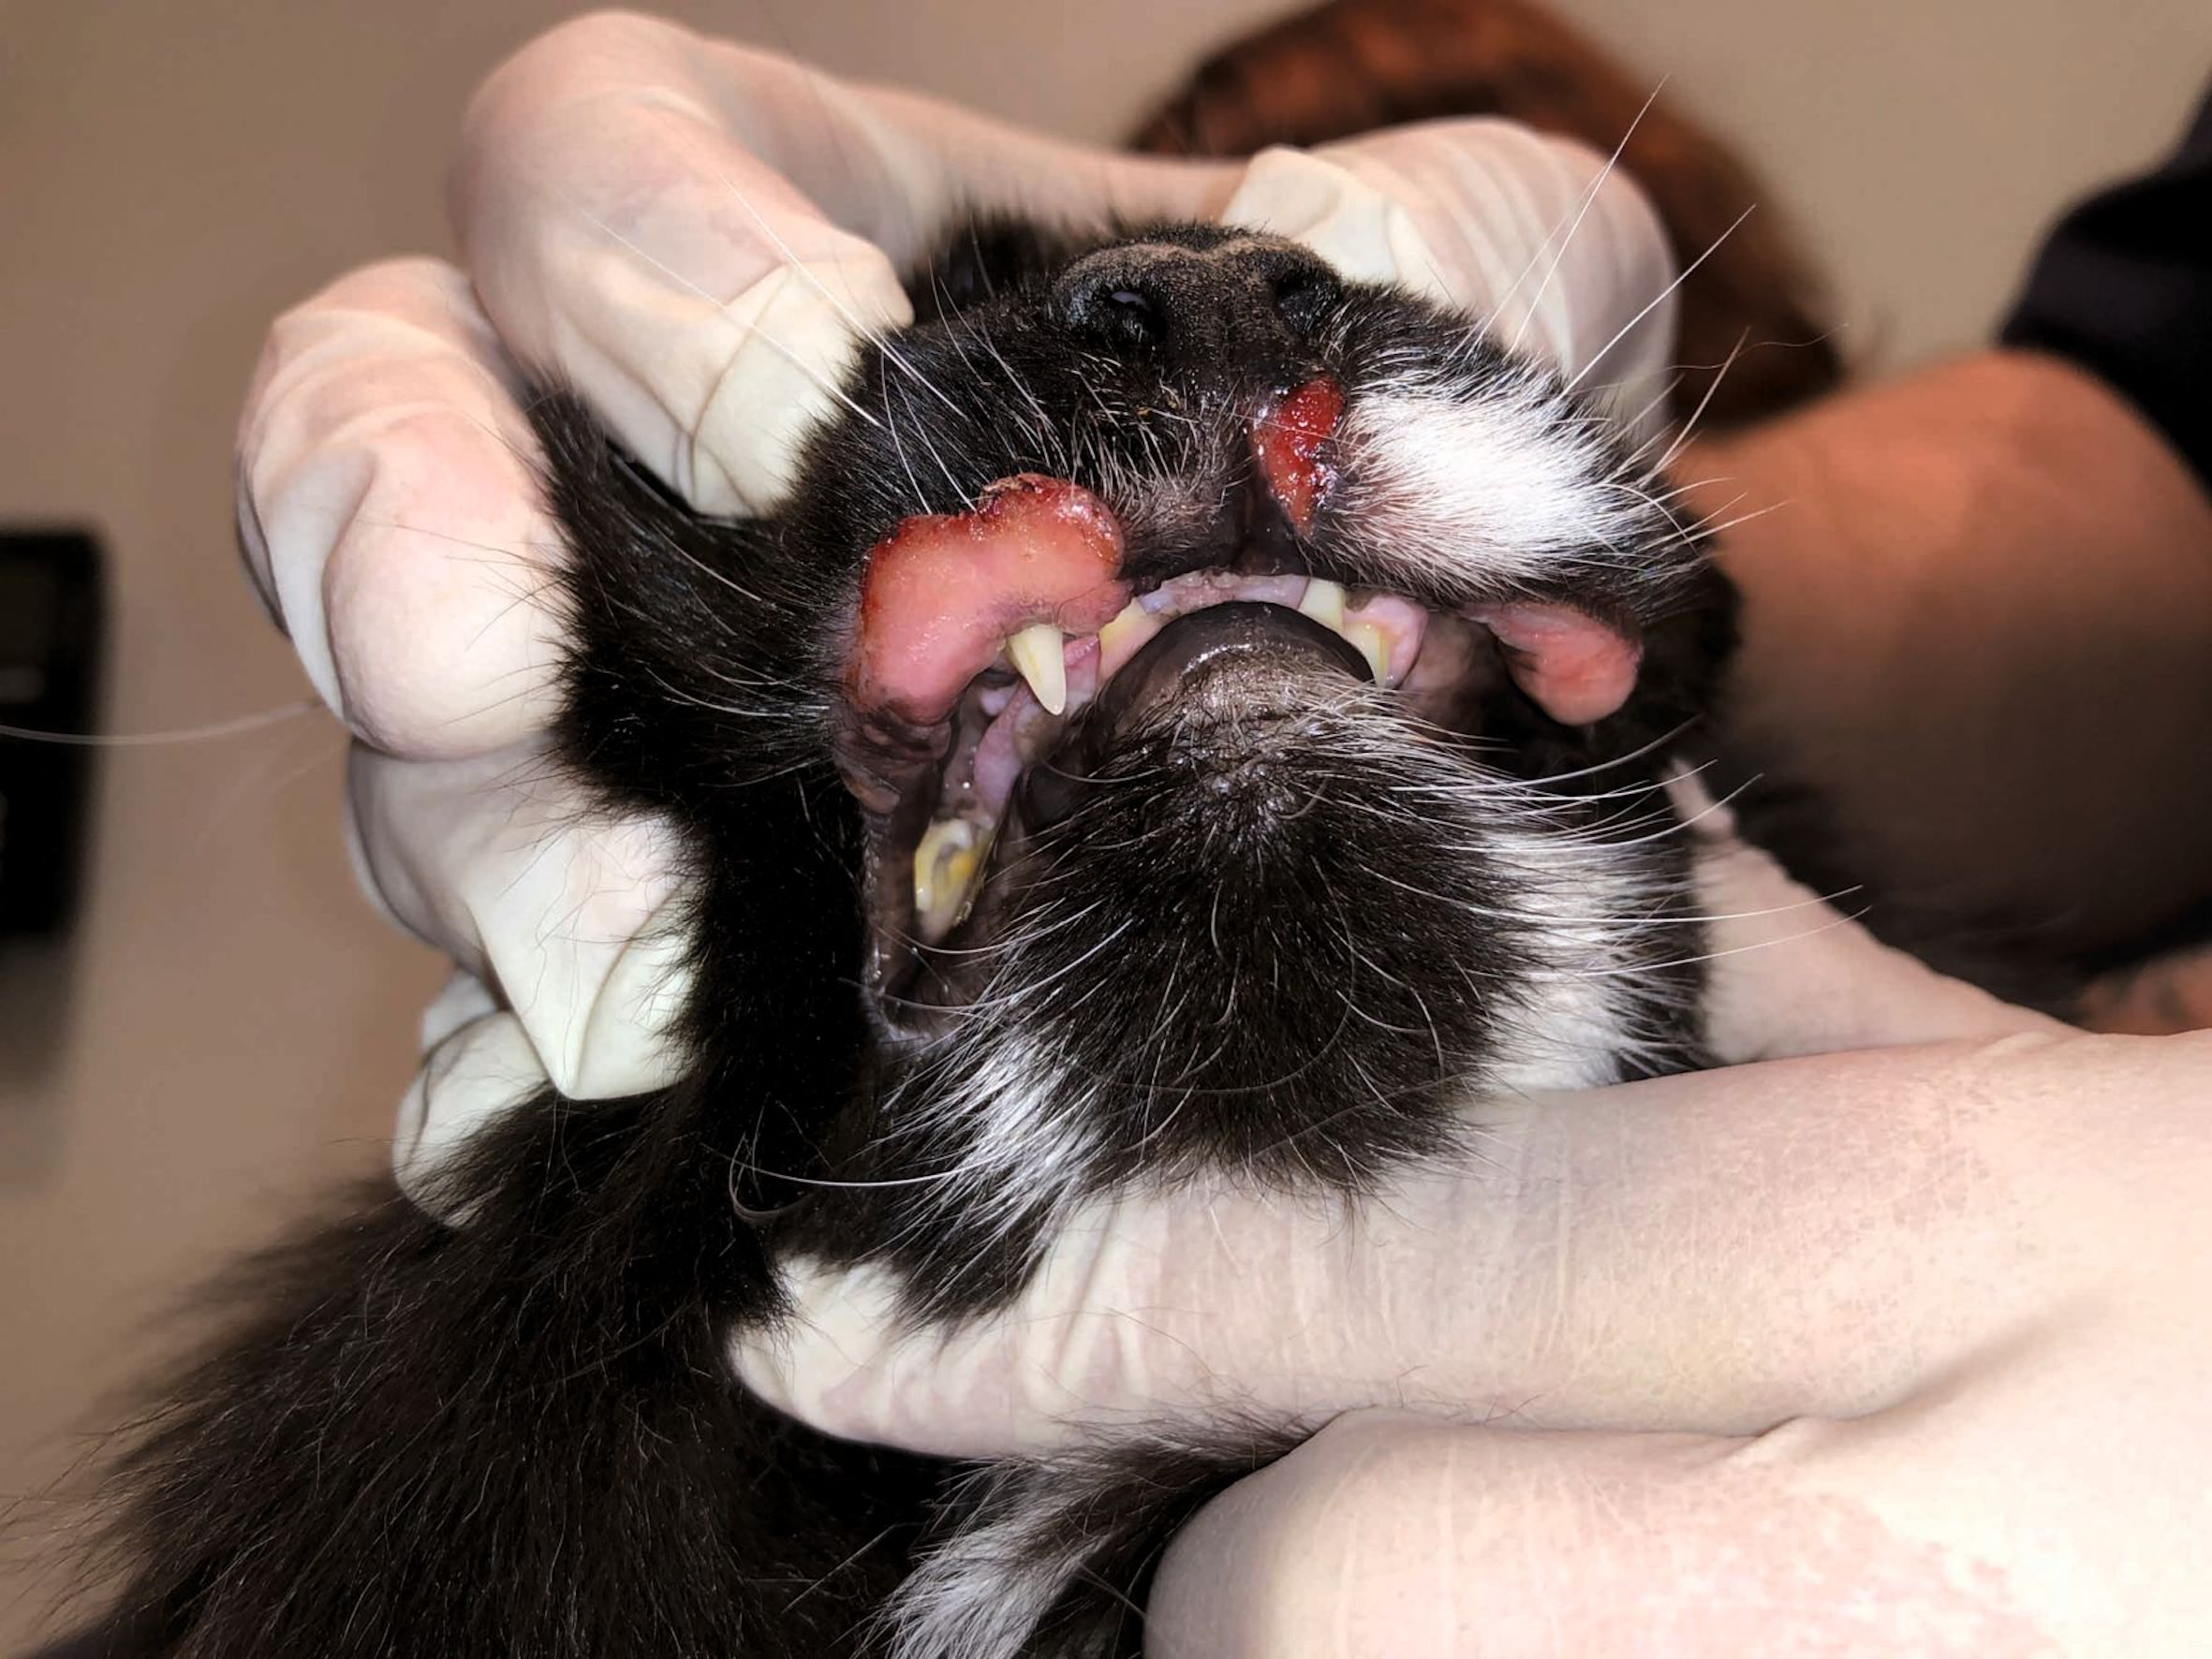 A cat with indolent ulcers on the upper lips, a common presentation of lesions associated with the eosinophilic granuloma complex